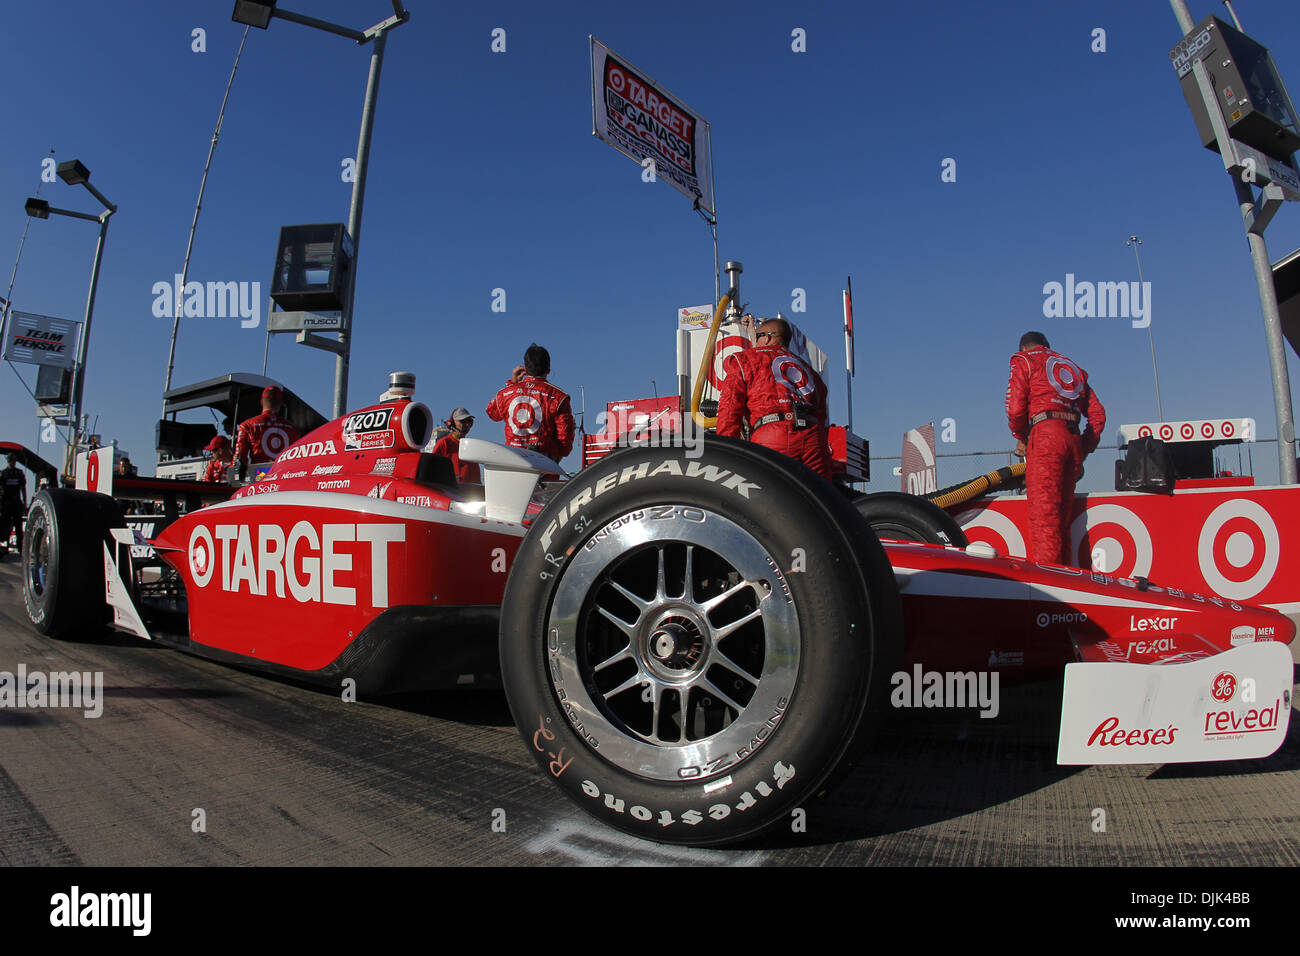 Aug. 28, 2010 - Joliet, Illinois, United States of America - The (9) car of Scott Dixon on the grid before the start of the IZOD IndyCar Peak Antifreeze & Motor Oil Indy 300 at Chicagoland Speedway. (Credit Image: © Geoffrey Siehr/Southcreek Global/ZUMApress.com) Stock Photo